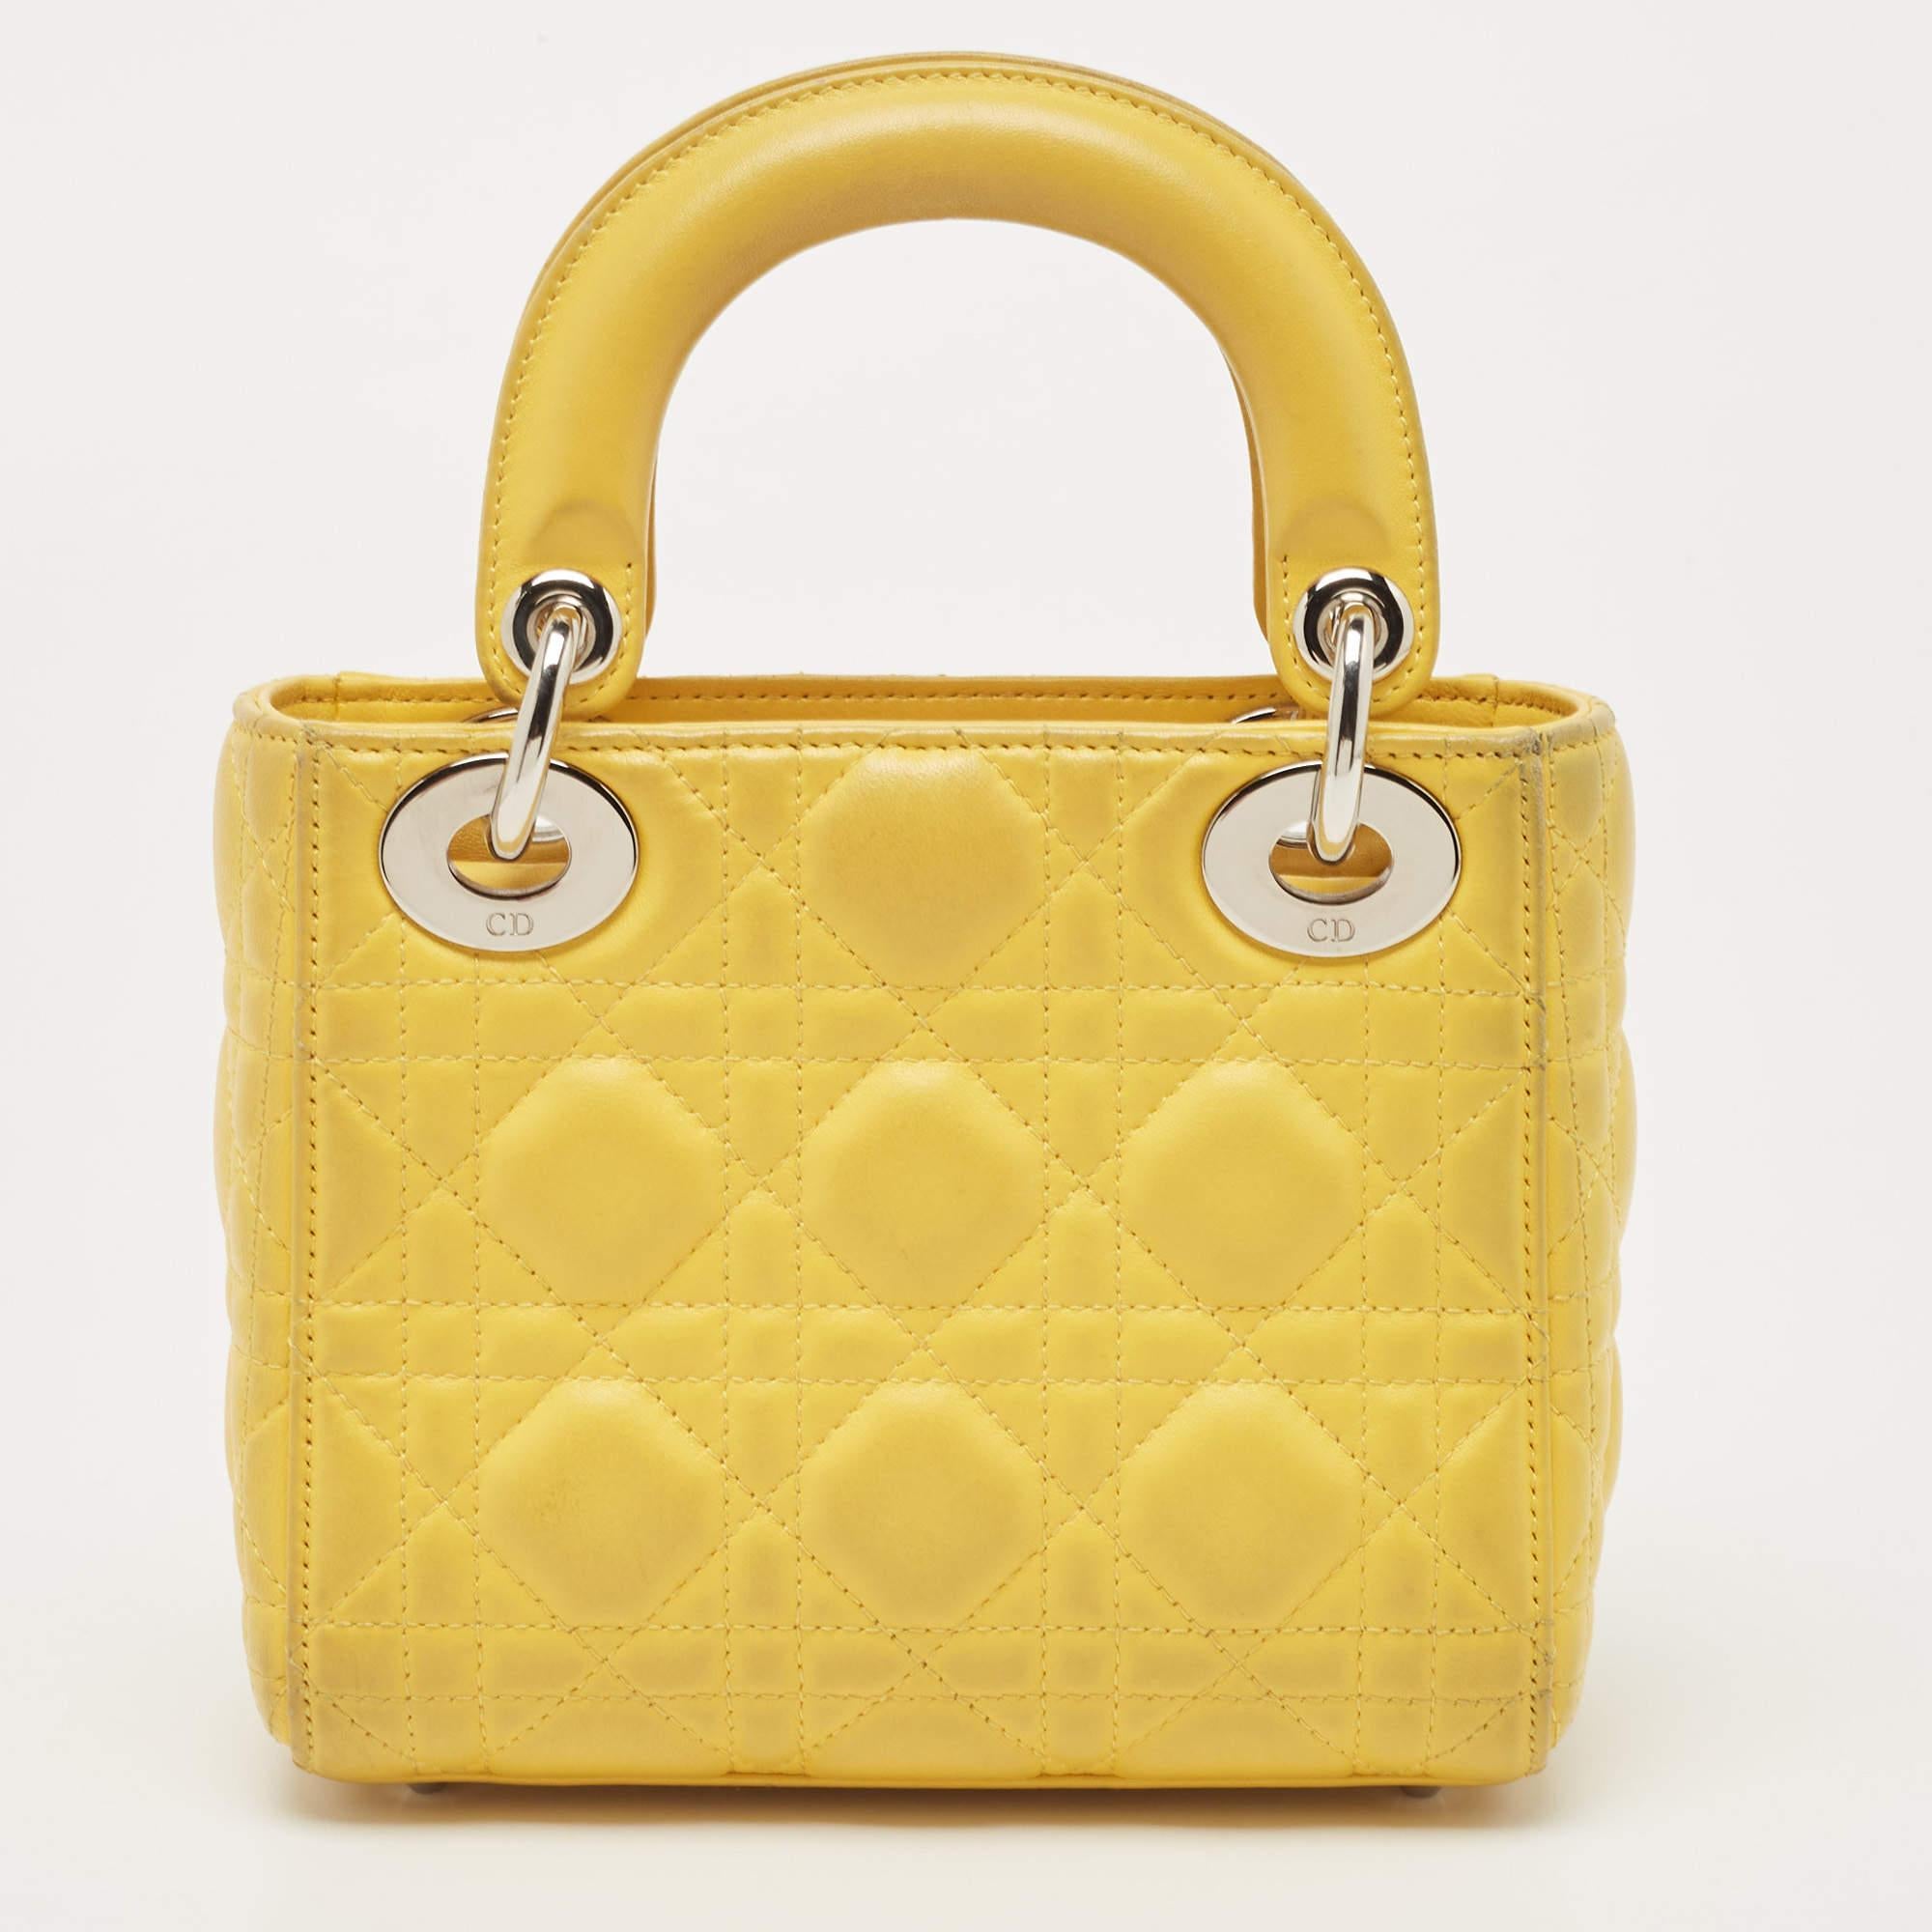 A timeless status and great design mark the Lady Dior tote. It is an iconic bag that people continue to invest in to this day. We have here this classic beauty crafted from yellow Cannage leather. The bag has a lined interior for your essentials.